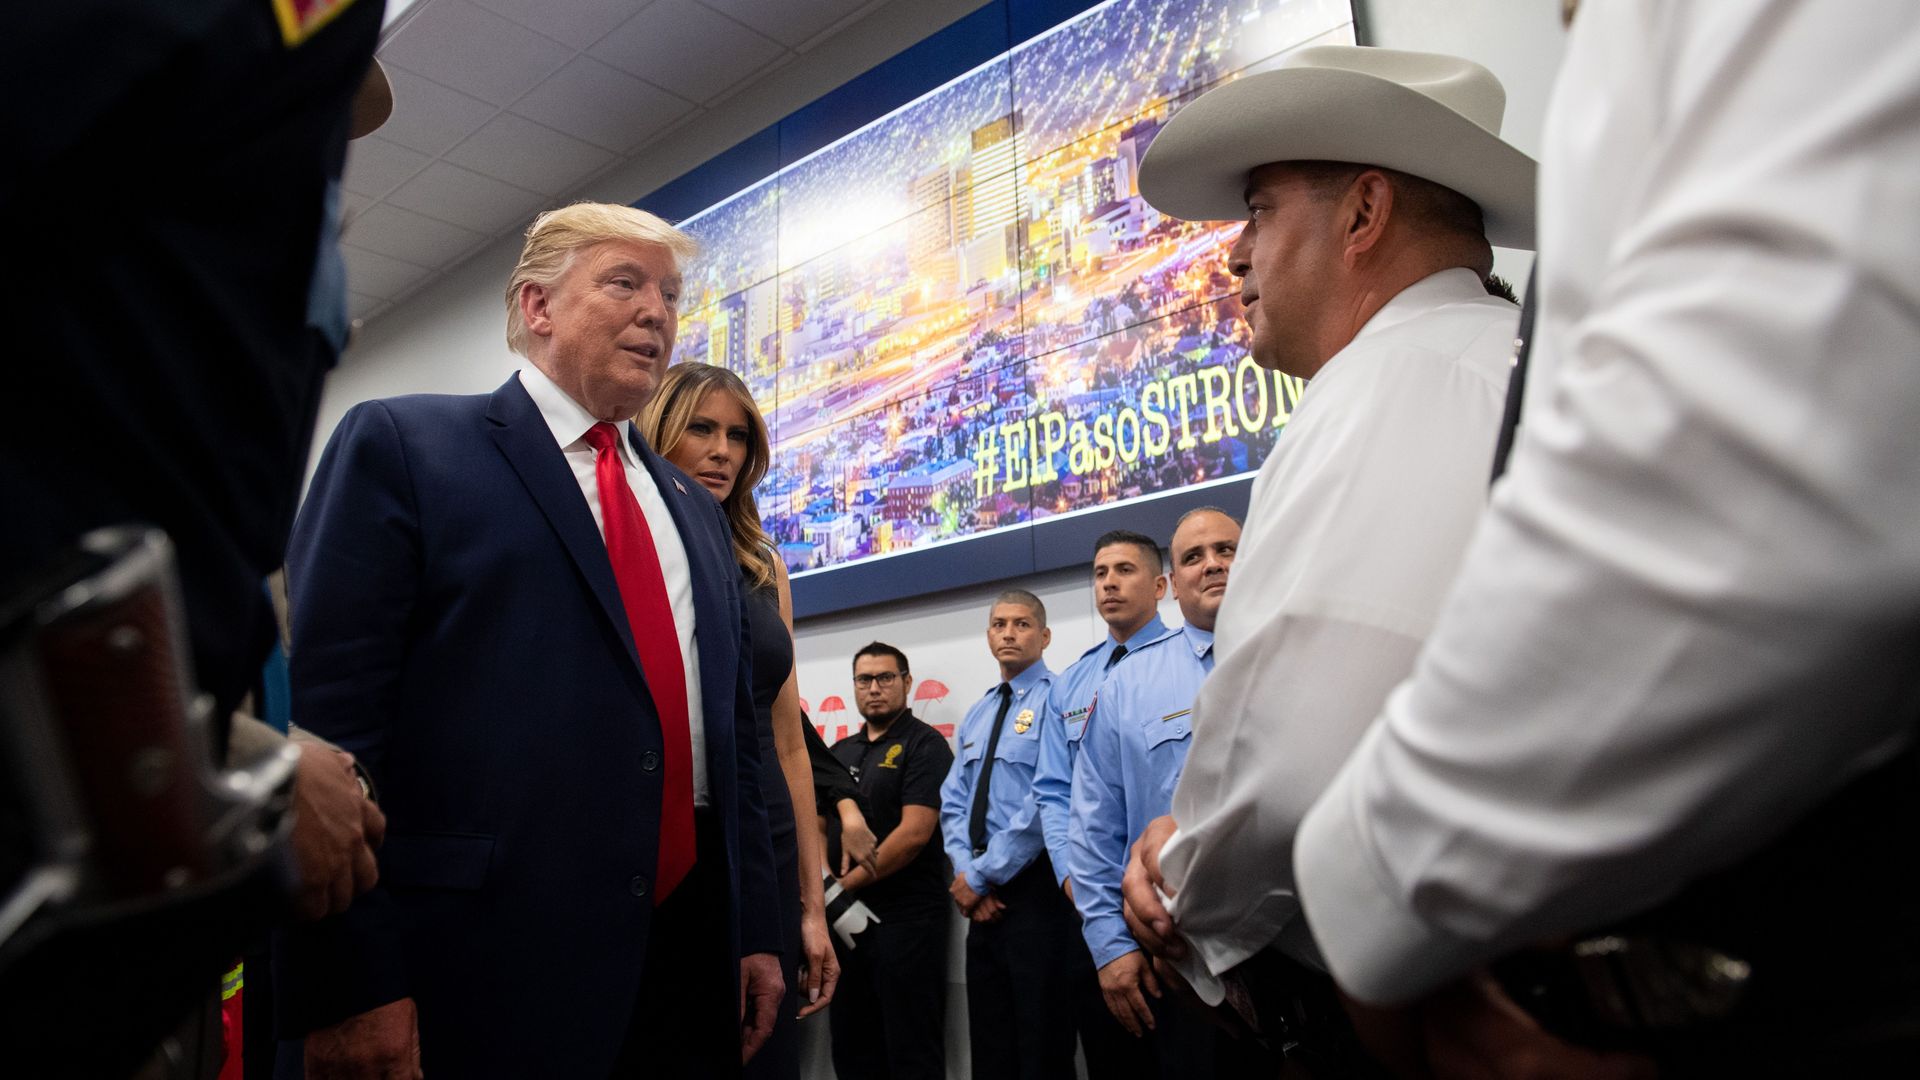 In this image, Trump speaks to law enforcement in El Paso, with Melania beside him